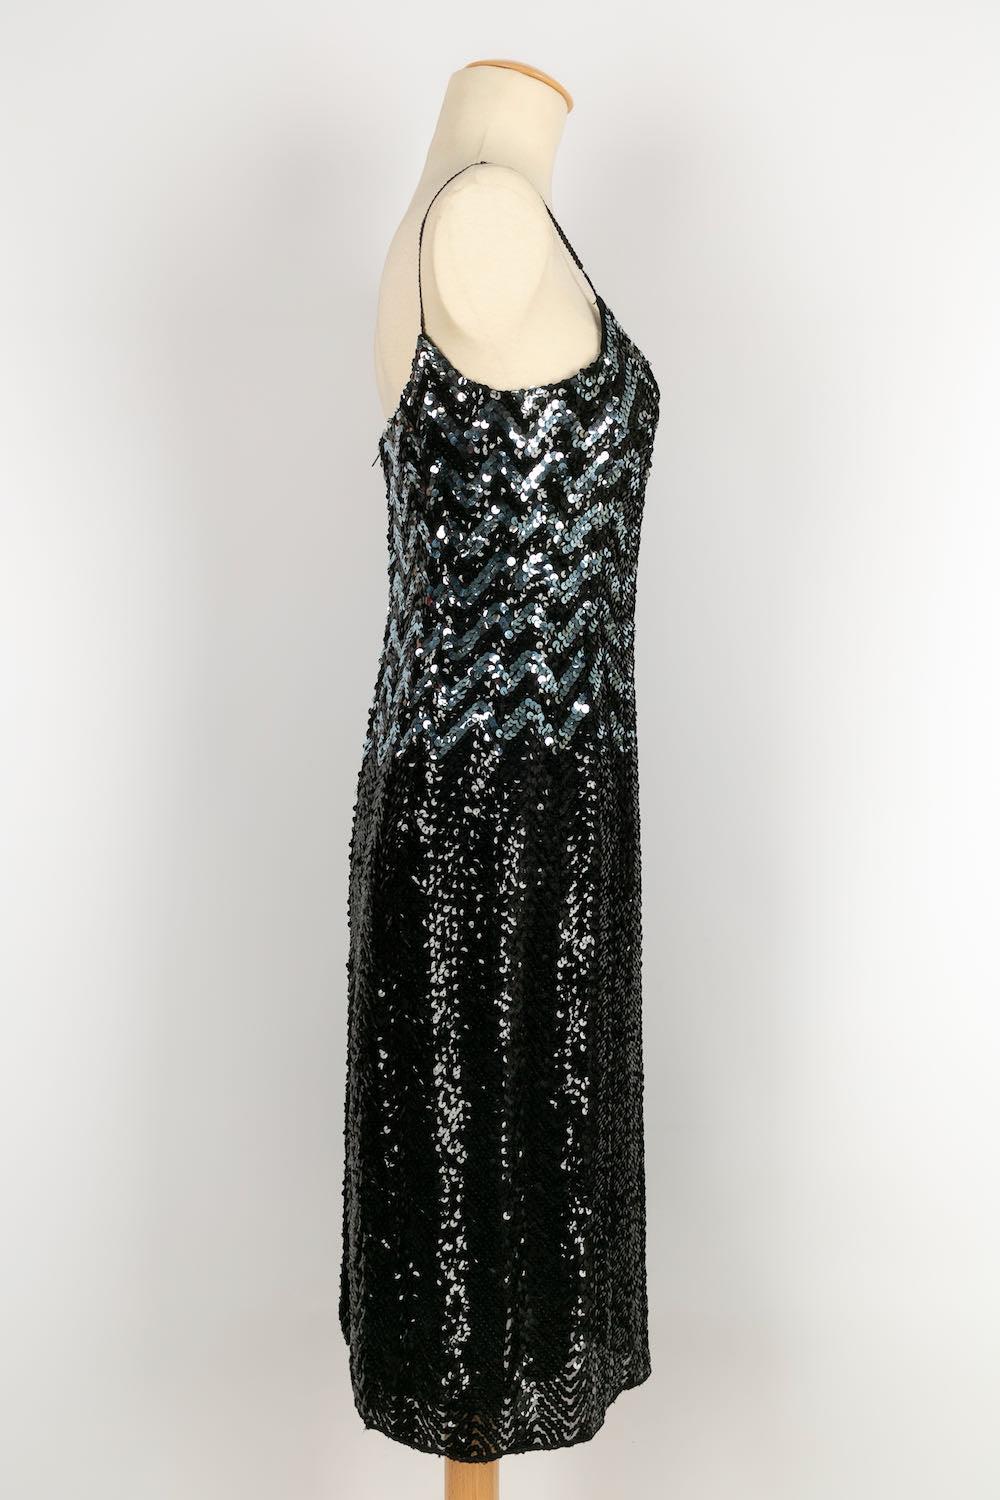 Louis Féraud -Dress embroidered with black and blue sequins. Size 38FR.

Additional information: 
Dimensions: Chest: 38 cm, Waist: 36 cm, Hips: 48 cm, Length: 104 cm
Condition: Very good condition
Seller Ref number: VR76